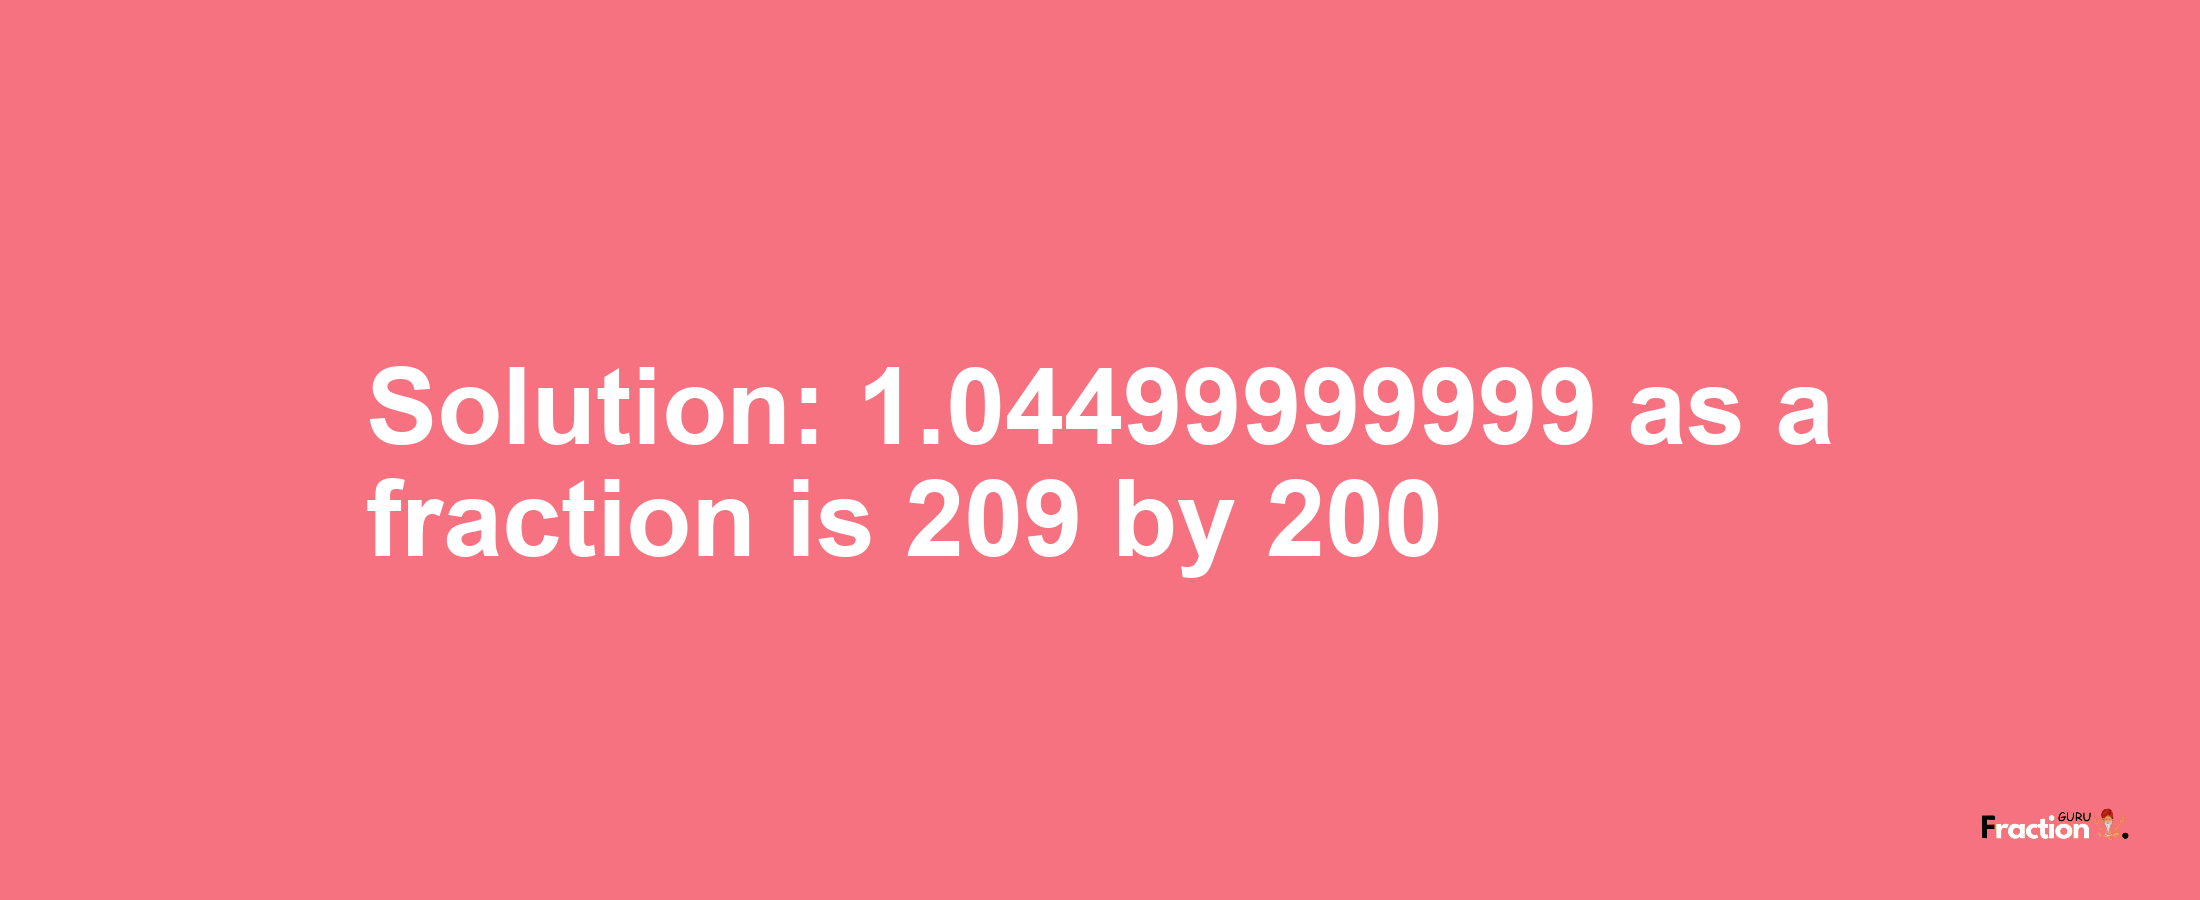 Solution:1.04499999999 as a fraction is 209/200